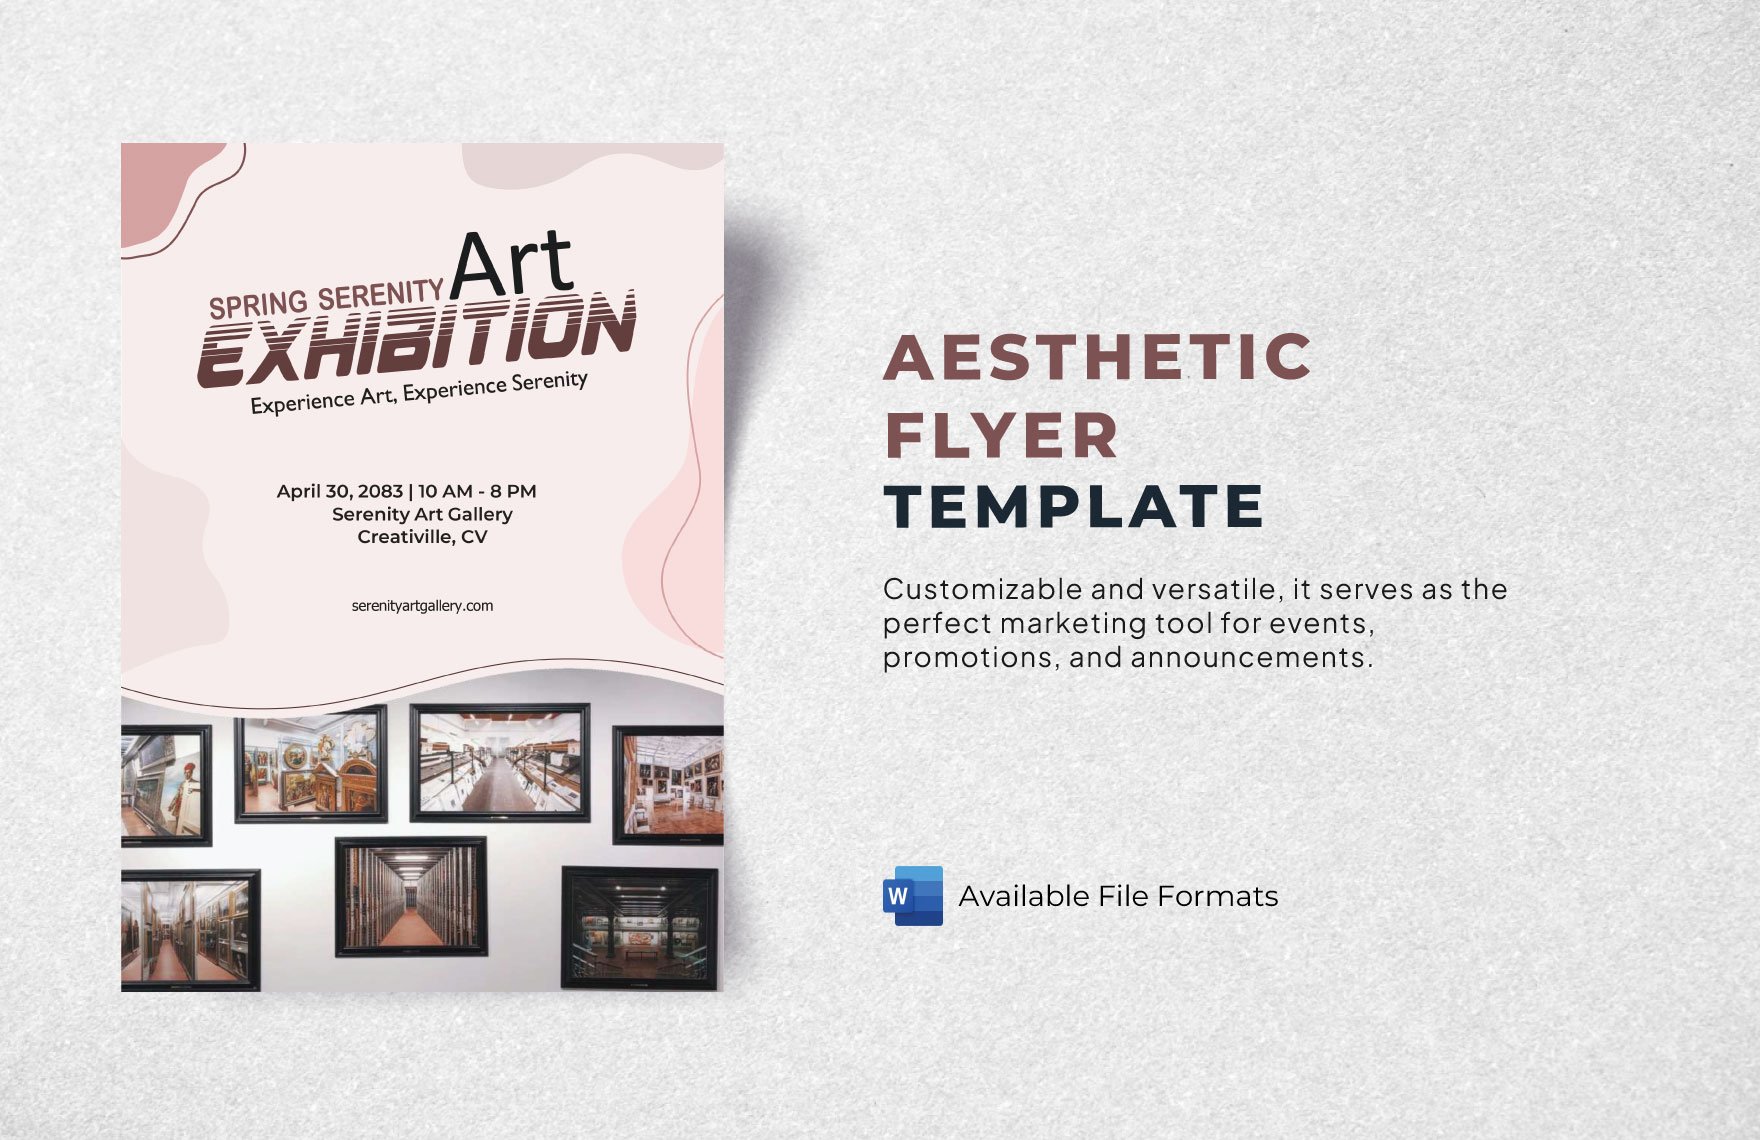 Aesthetic Flyer Template in Word